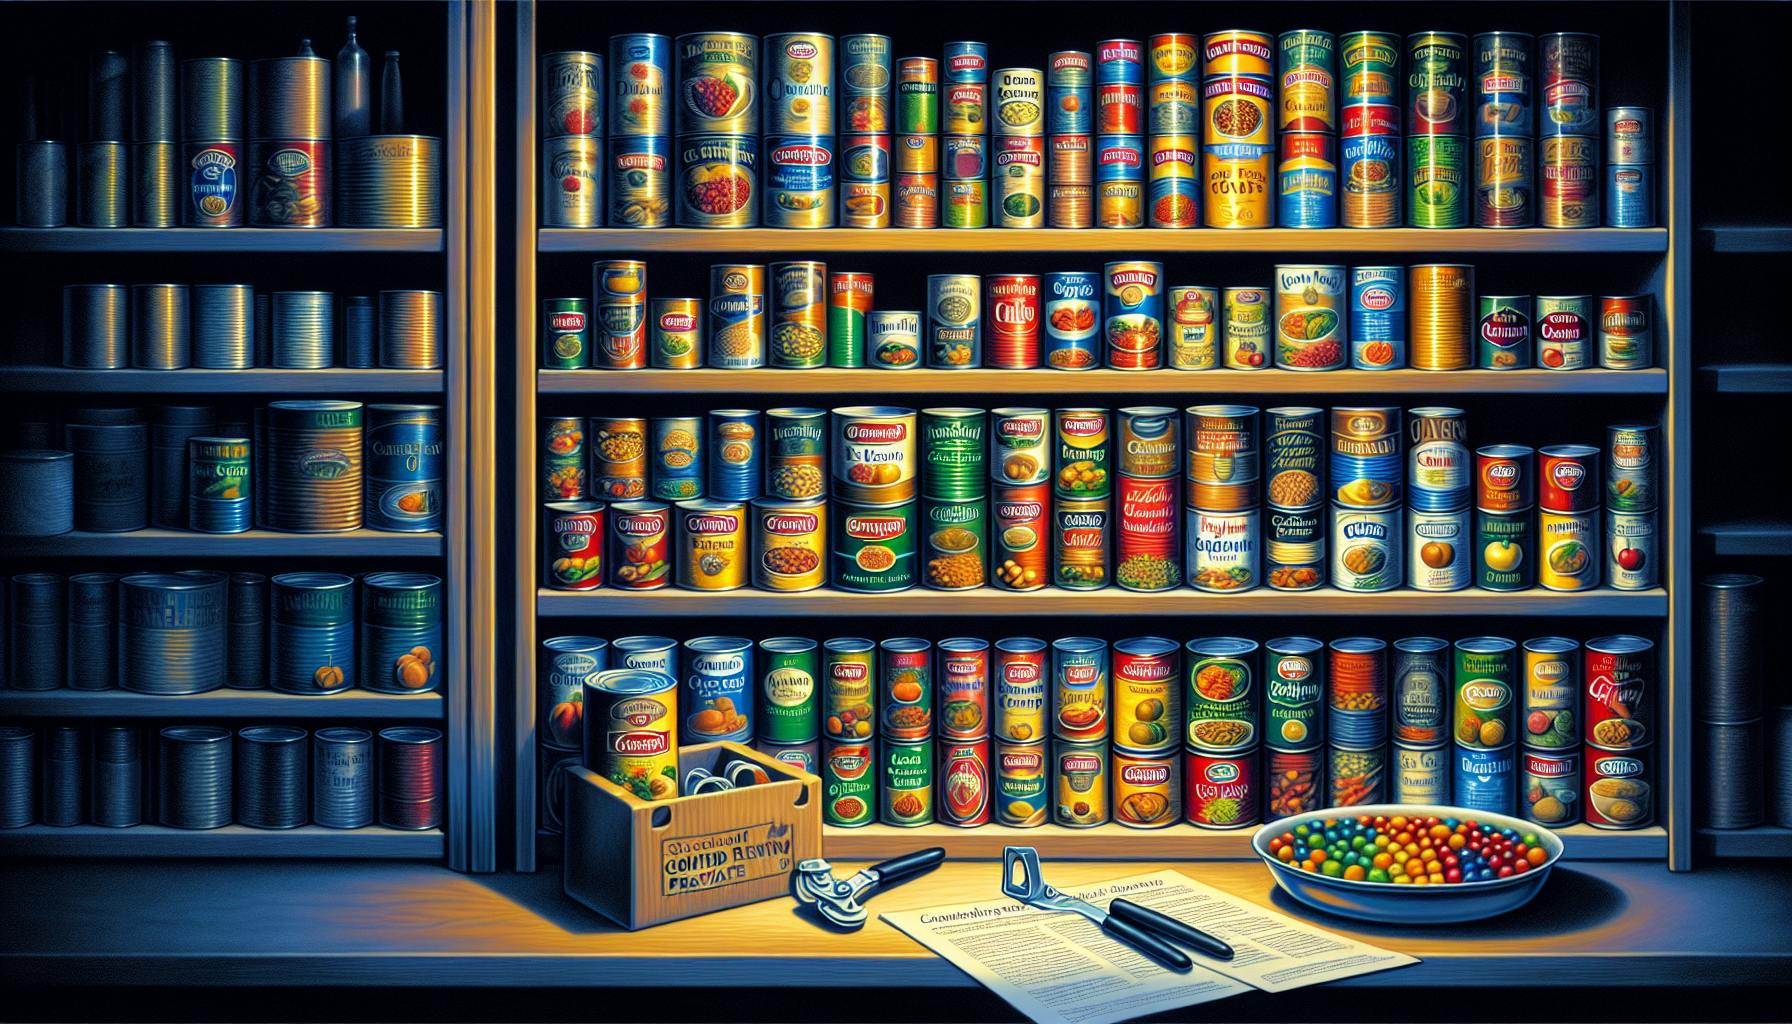 Canned Food for Prepping: Best Practices